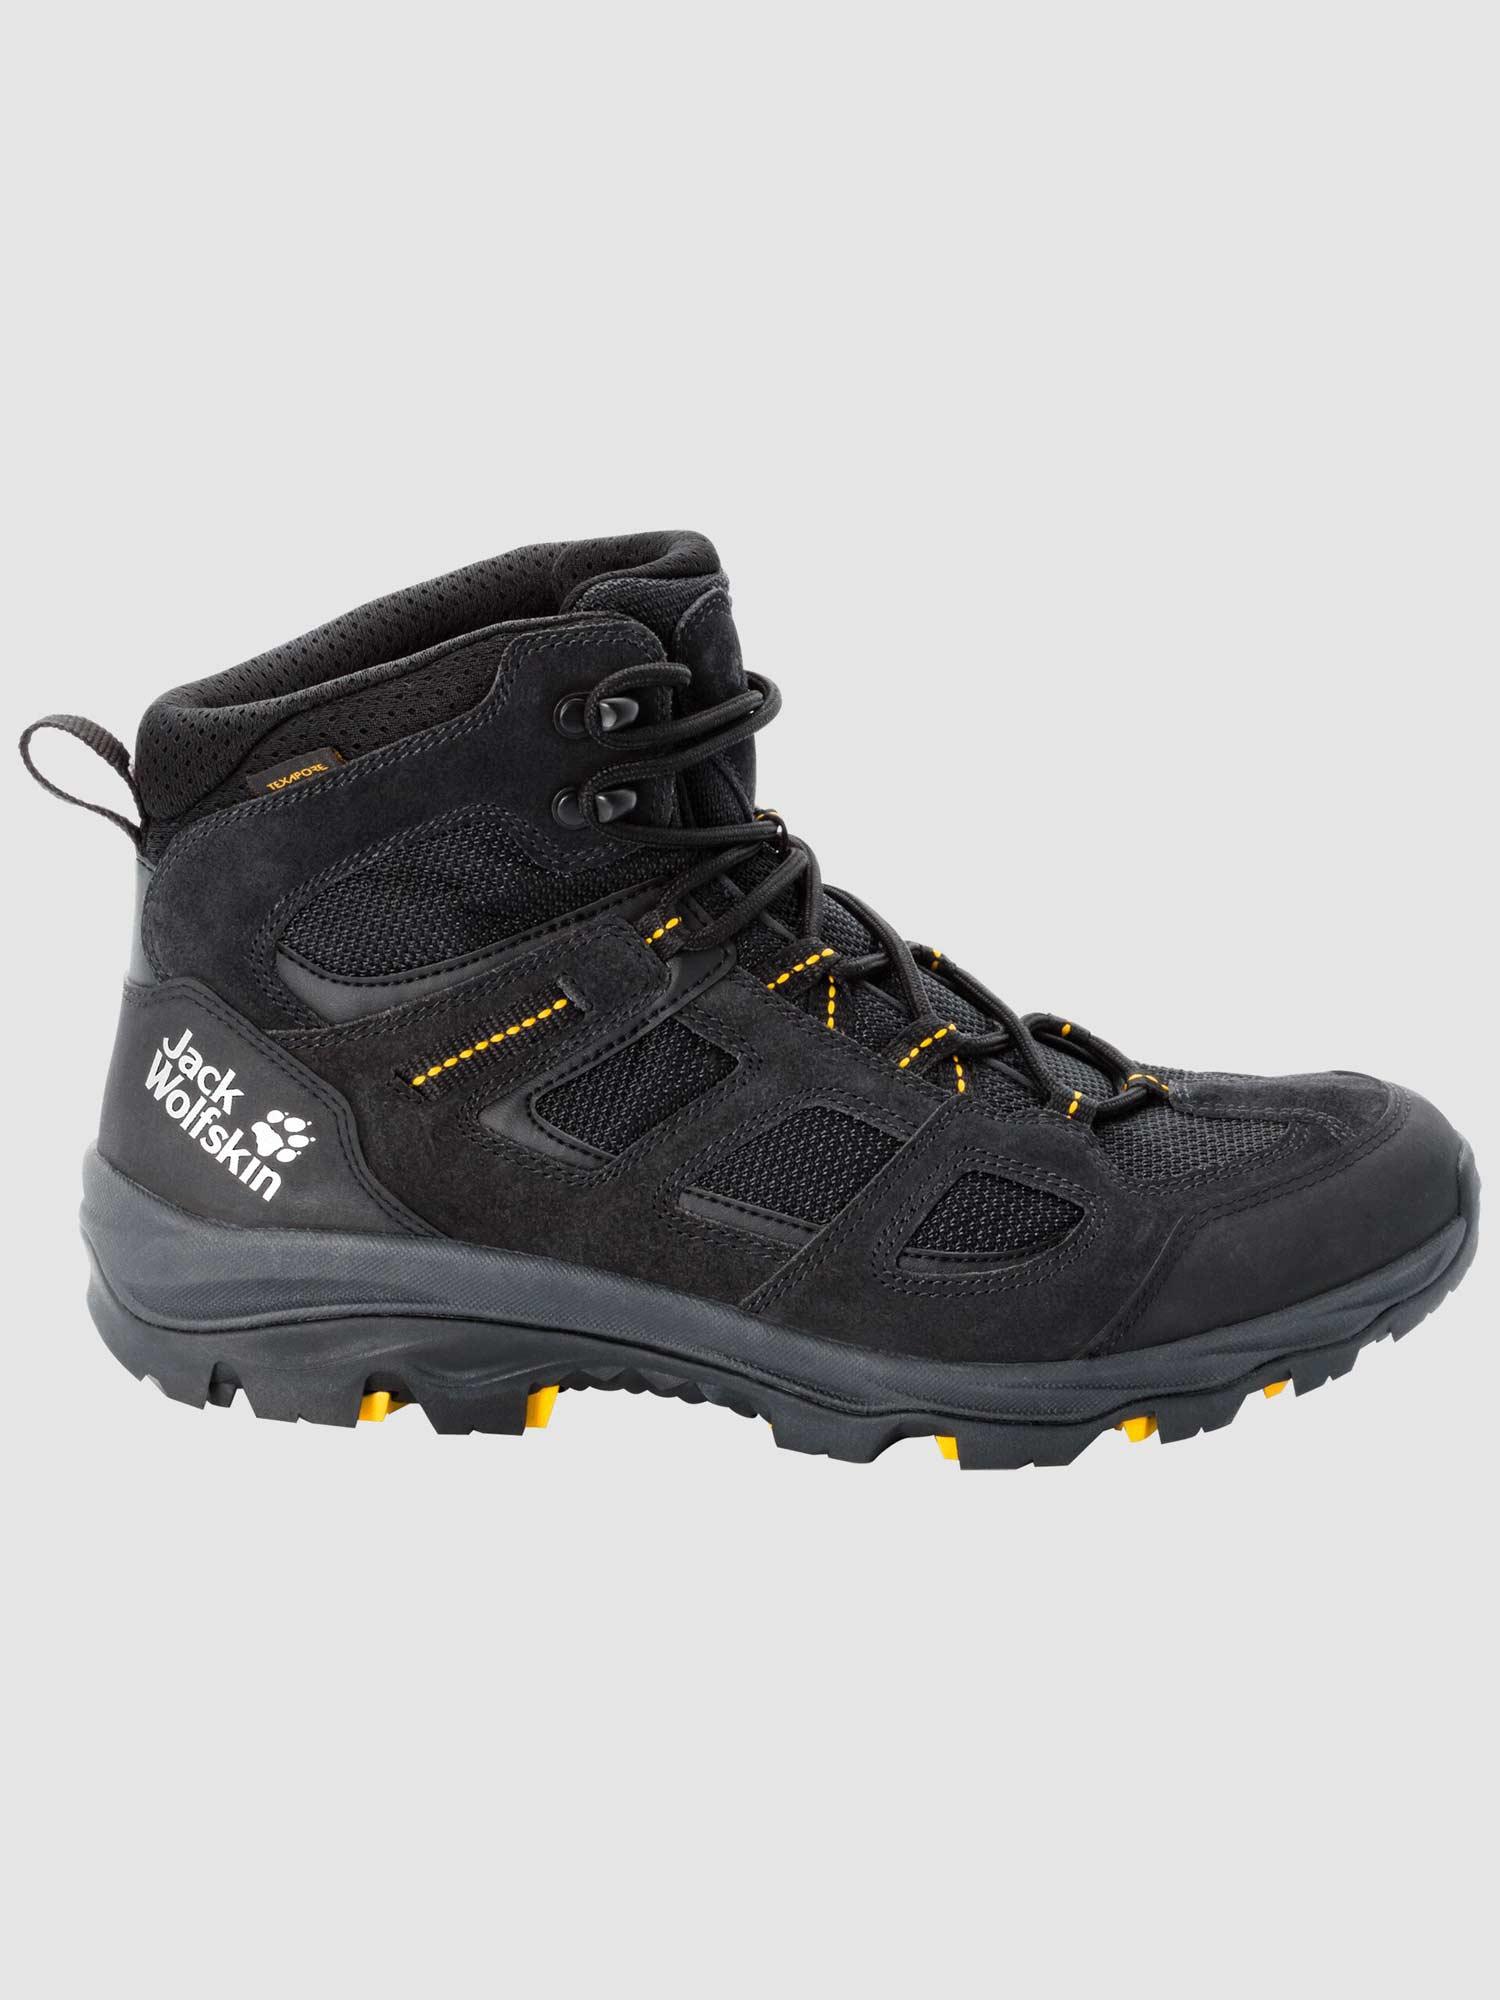 Selected image for JACK WOLFSKIN VOJO 3 TEXAPORE MID Muške cipele crne